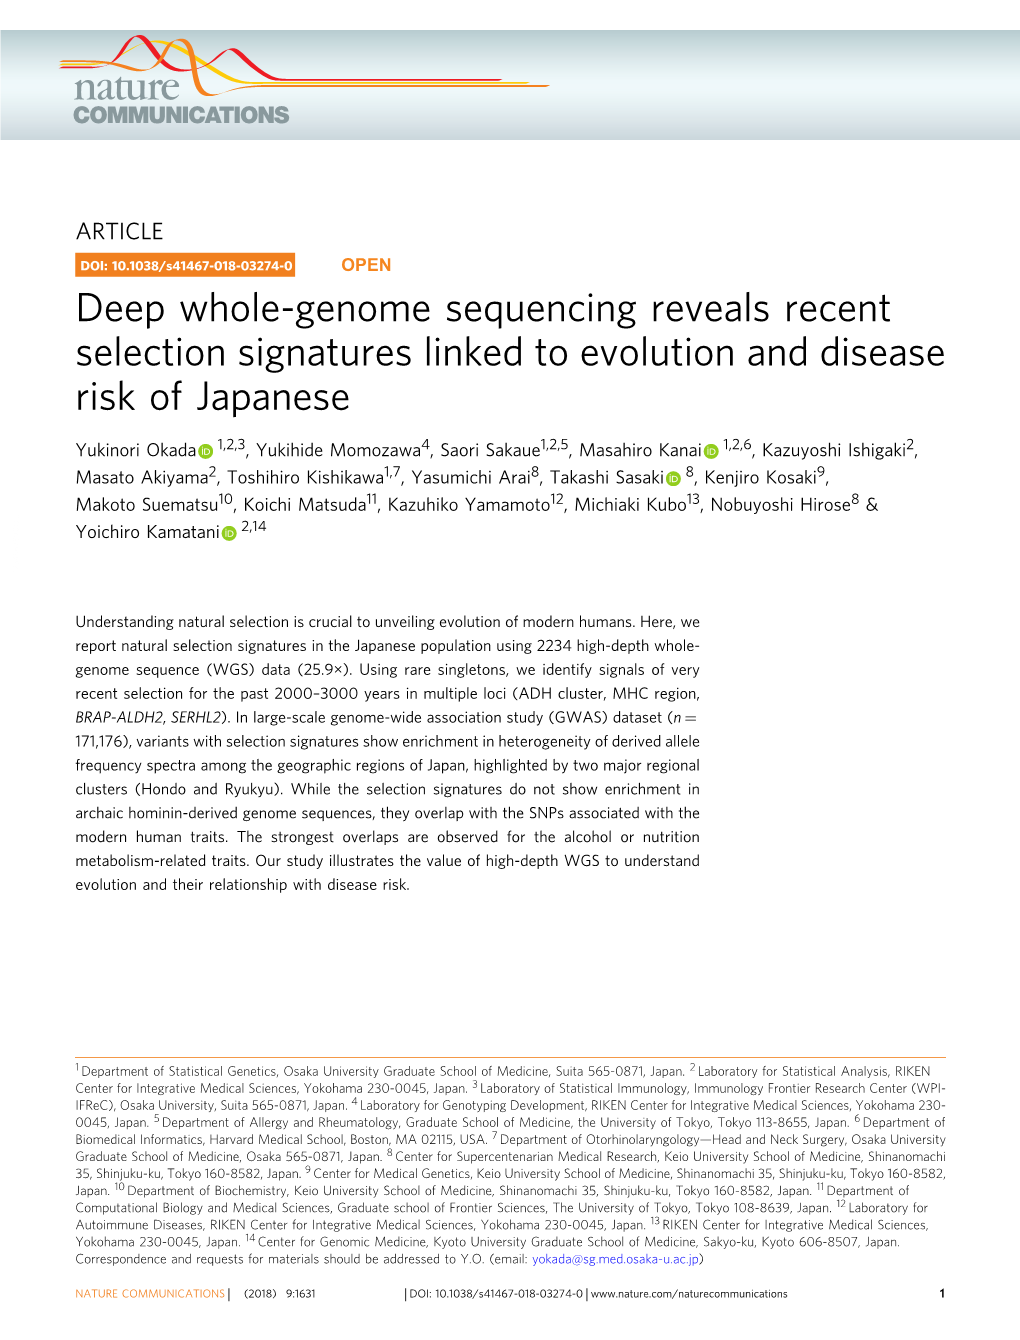 Deep Whole-Genome Sequencing Reveals Recent Selection Signatures Linked to Evolution and Disease Risk of Japanese